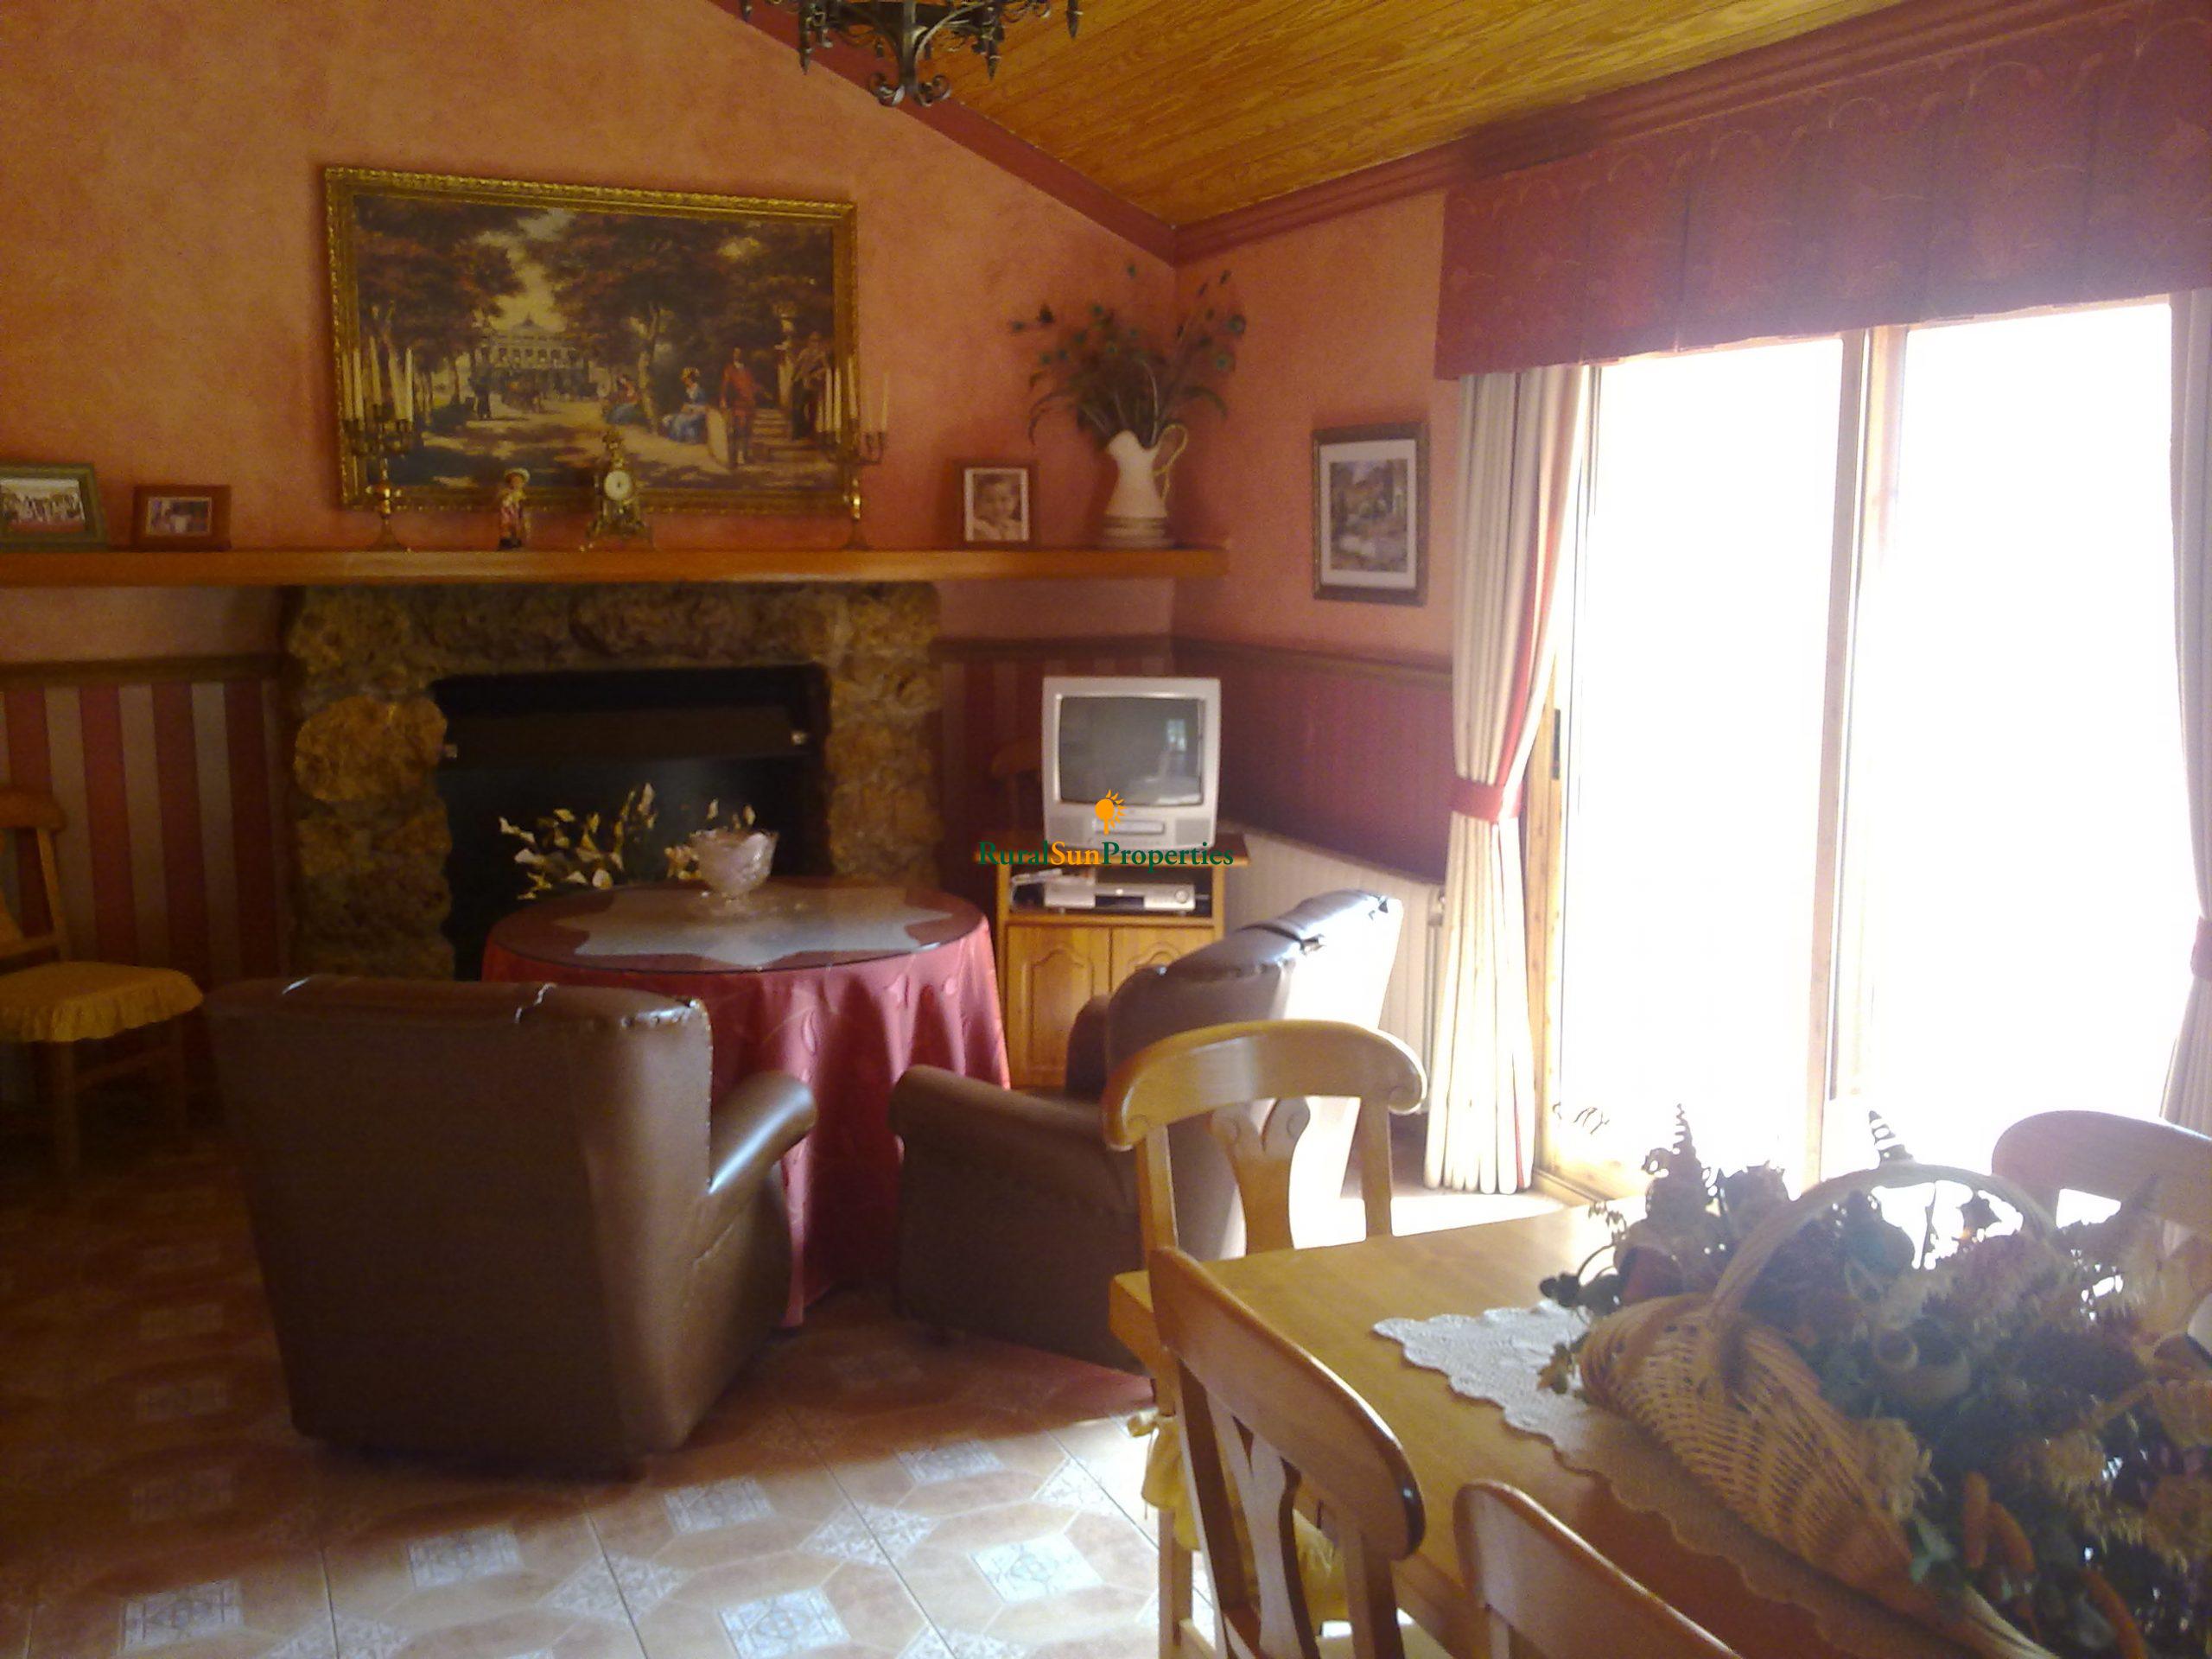 Bullas countryside: Country house in beautiful valley surrounded by mountains and vineyards with panoramic views